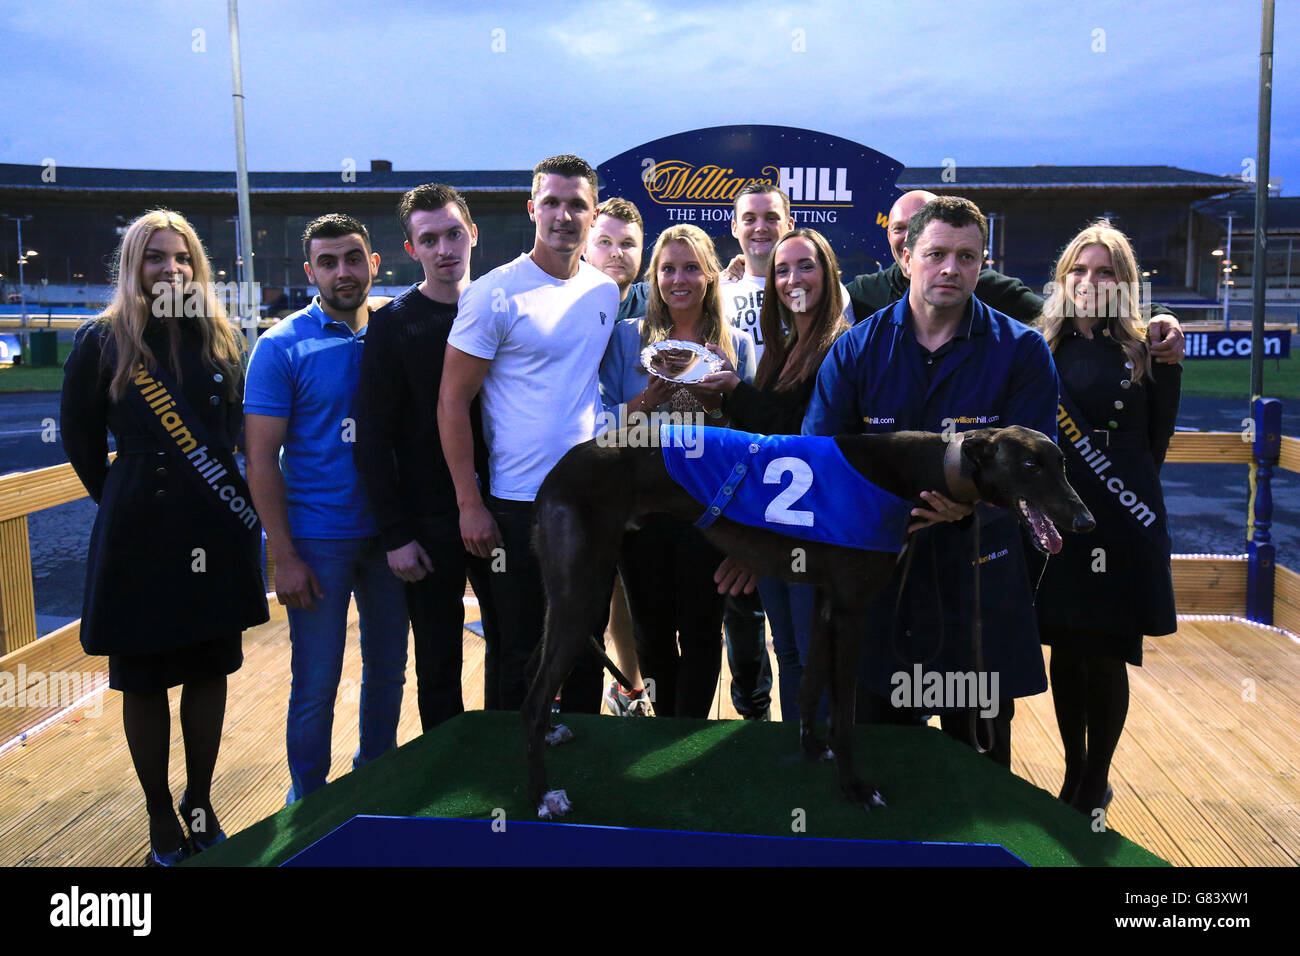 Greyhound Racing - William Hill Derby - Semi Finals - Wimbledon Stadium. Connections of Priceless Sun during the presentation for the William Hill Champion Hurdle Heat 2 Stock Photo